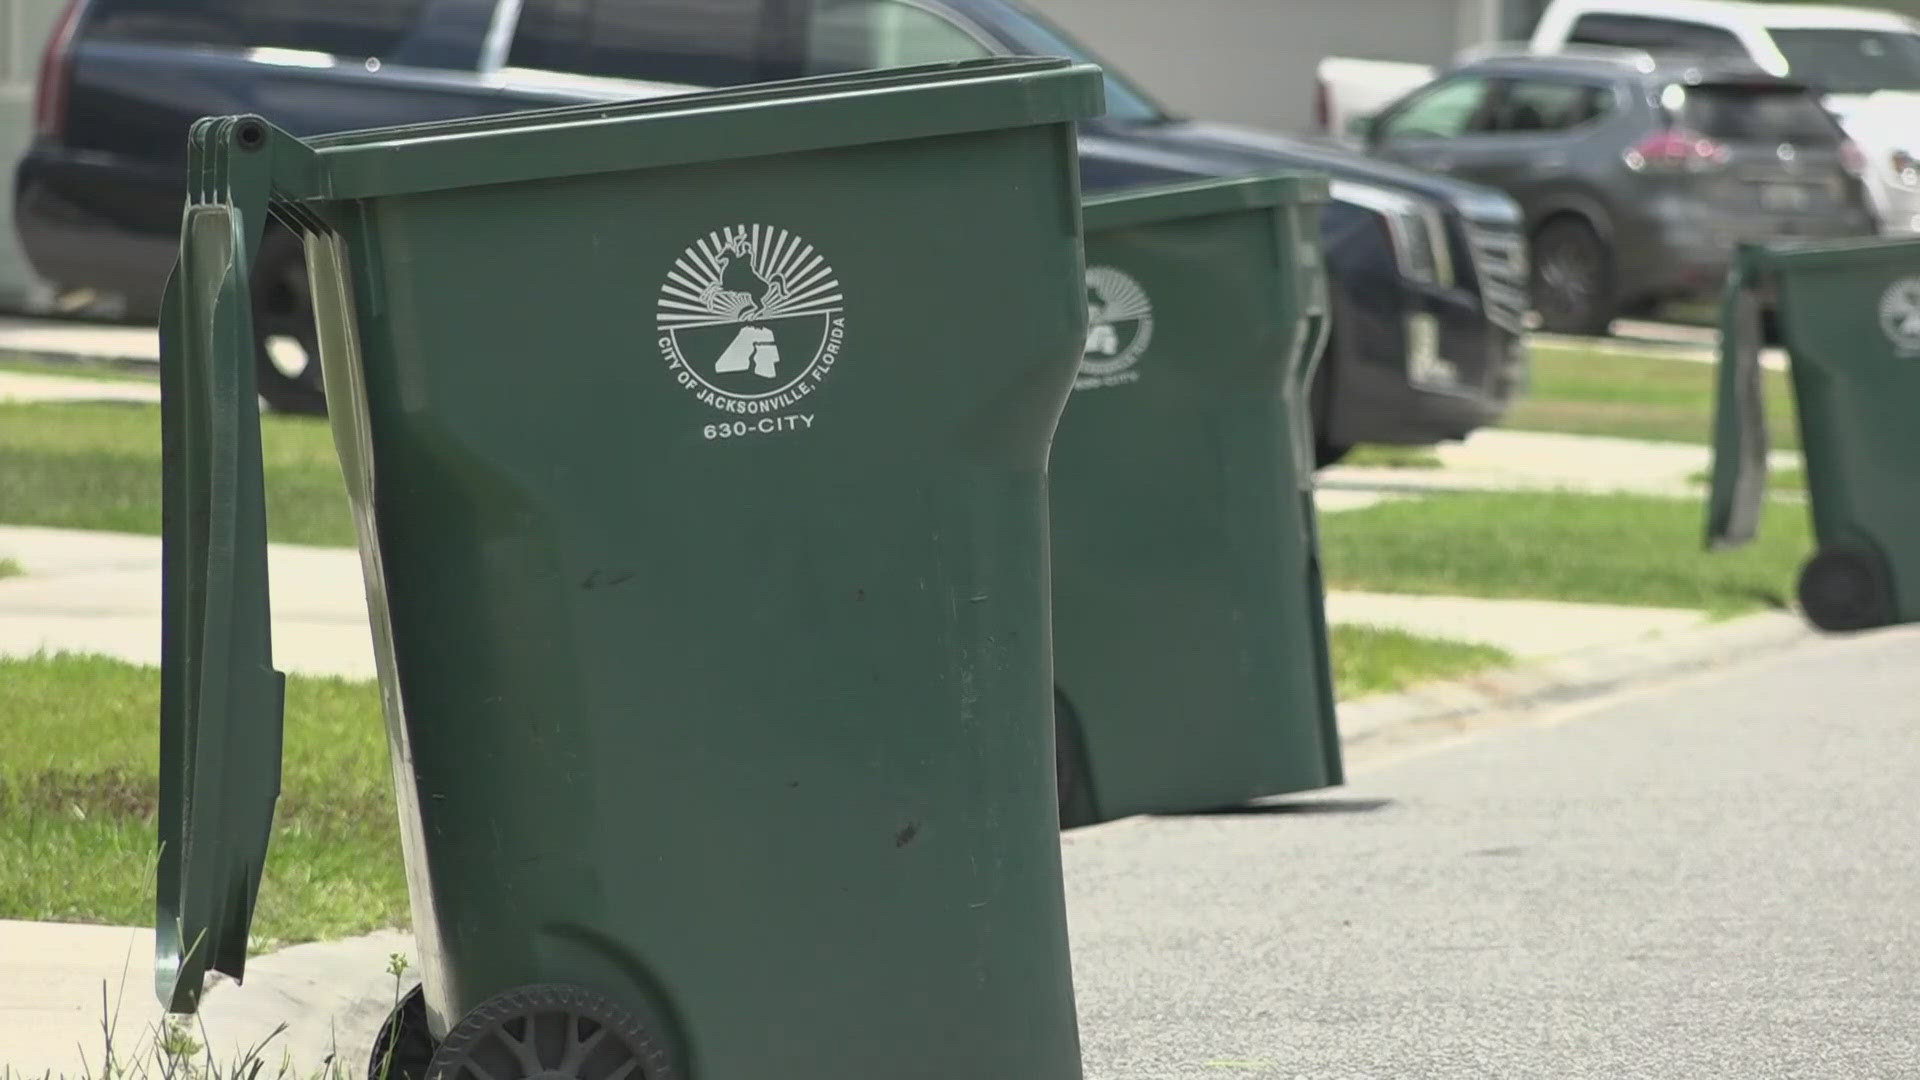 The new law curbs HOA power on trash cans, holiday decorations and several other items.